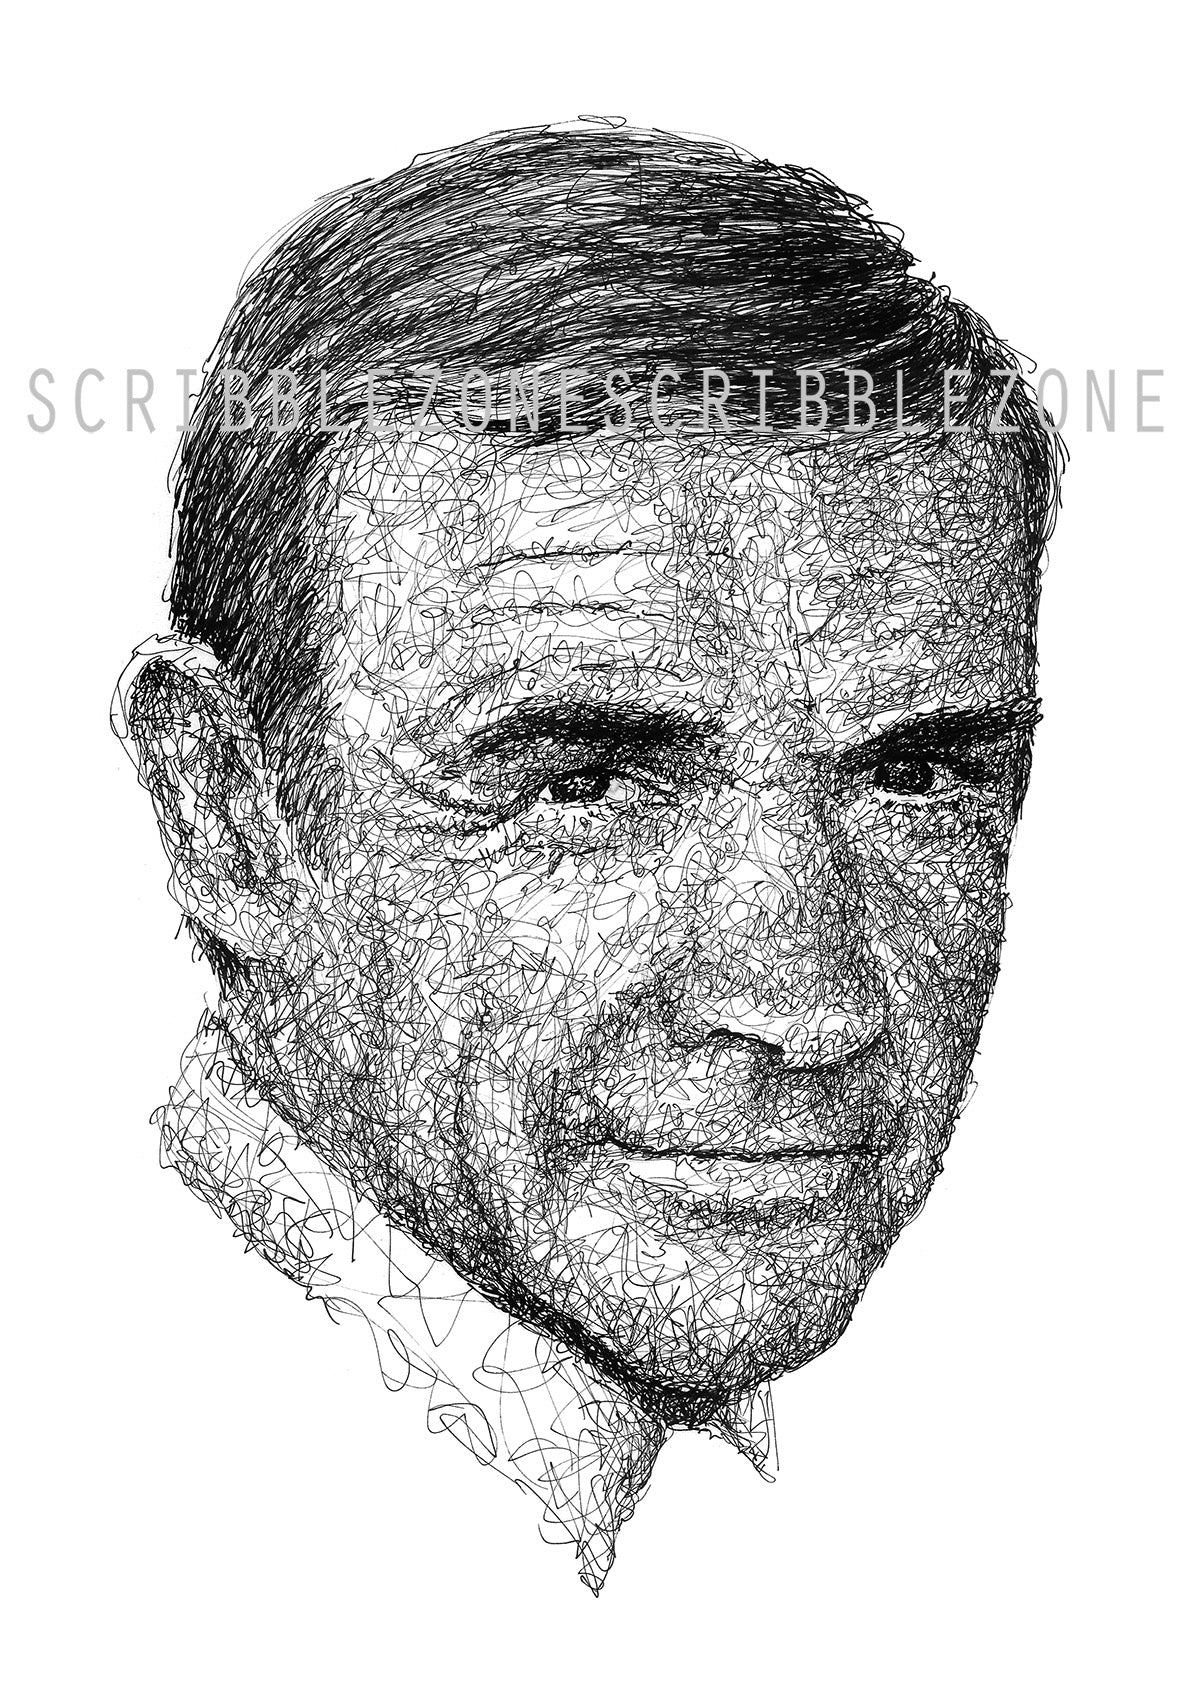 Scribbled Sean Connery